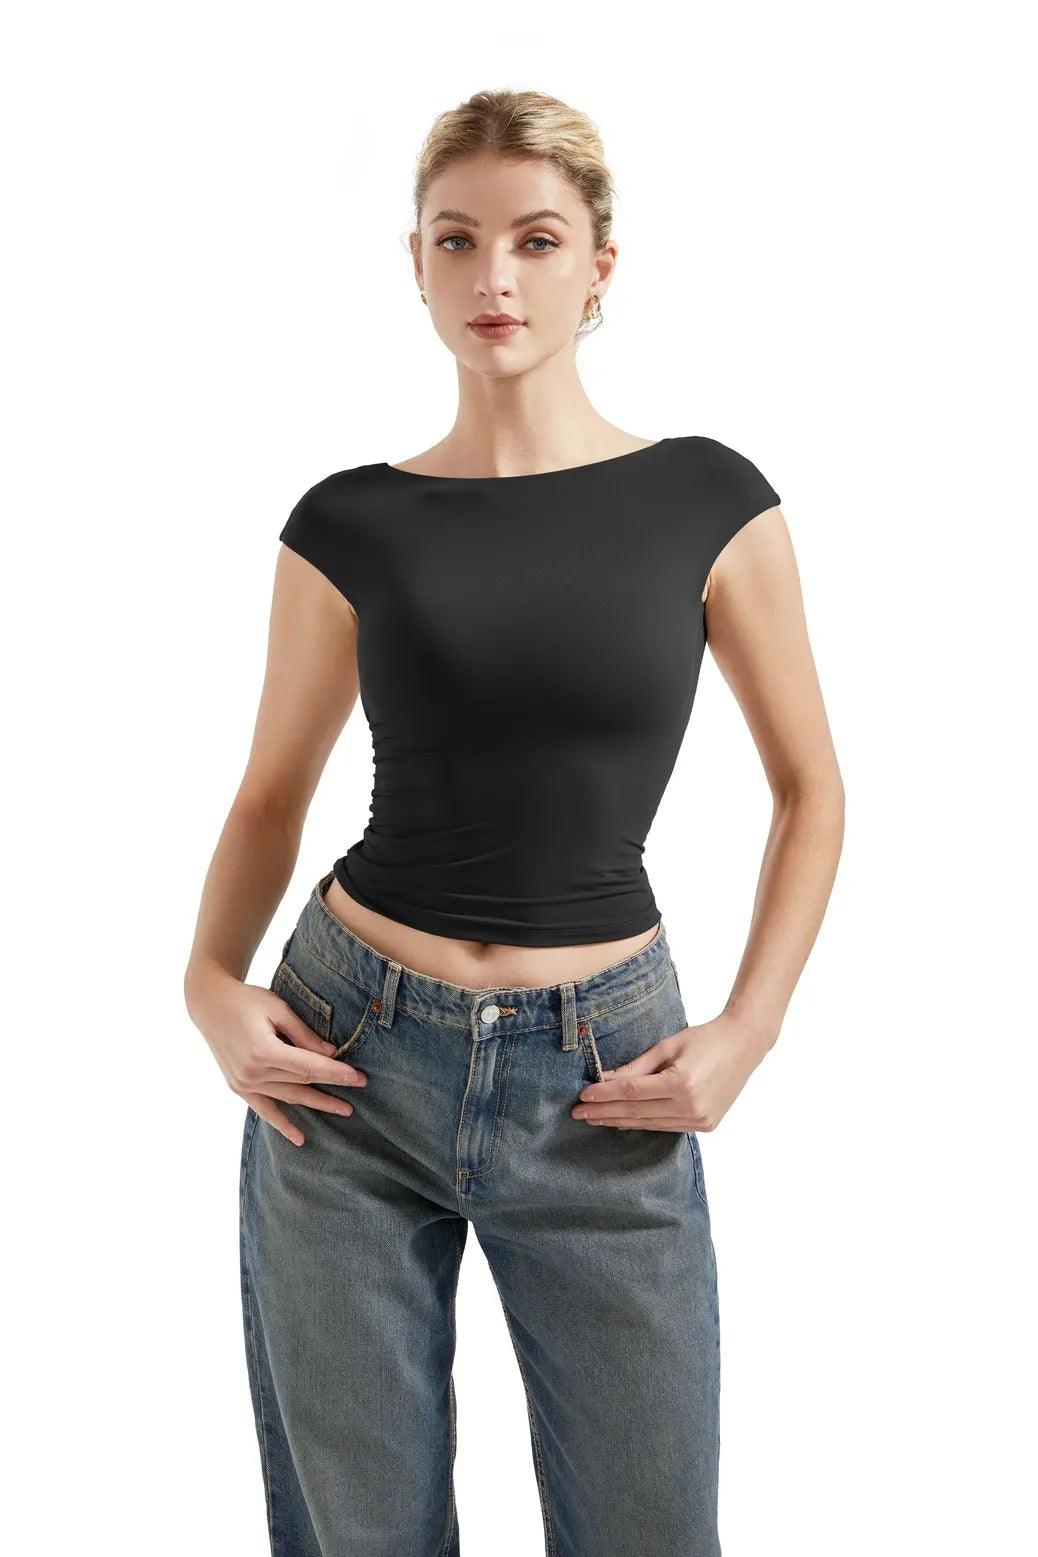 Buttery Soft Backless Shirt-Clothing-SUUKSESS-Black-XS-SUUKSESS